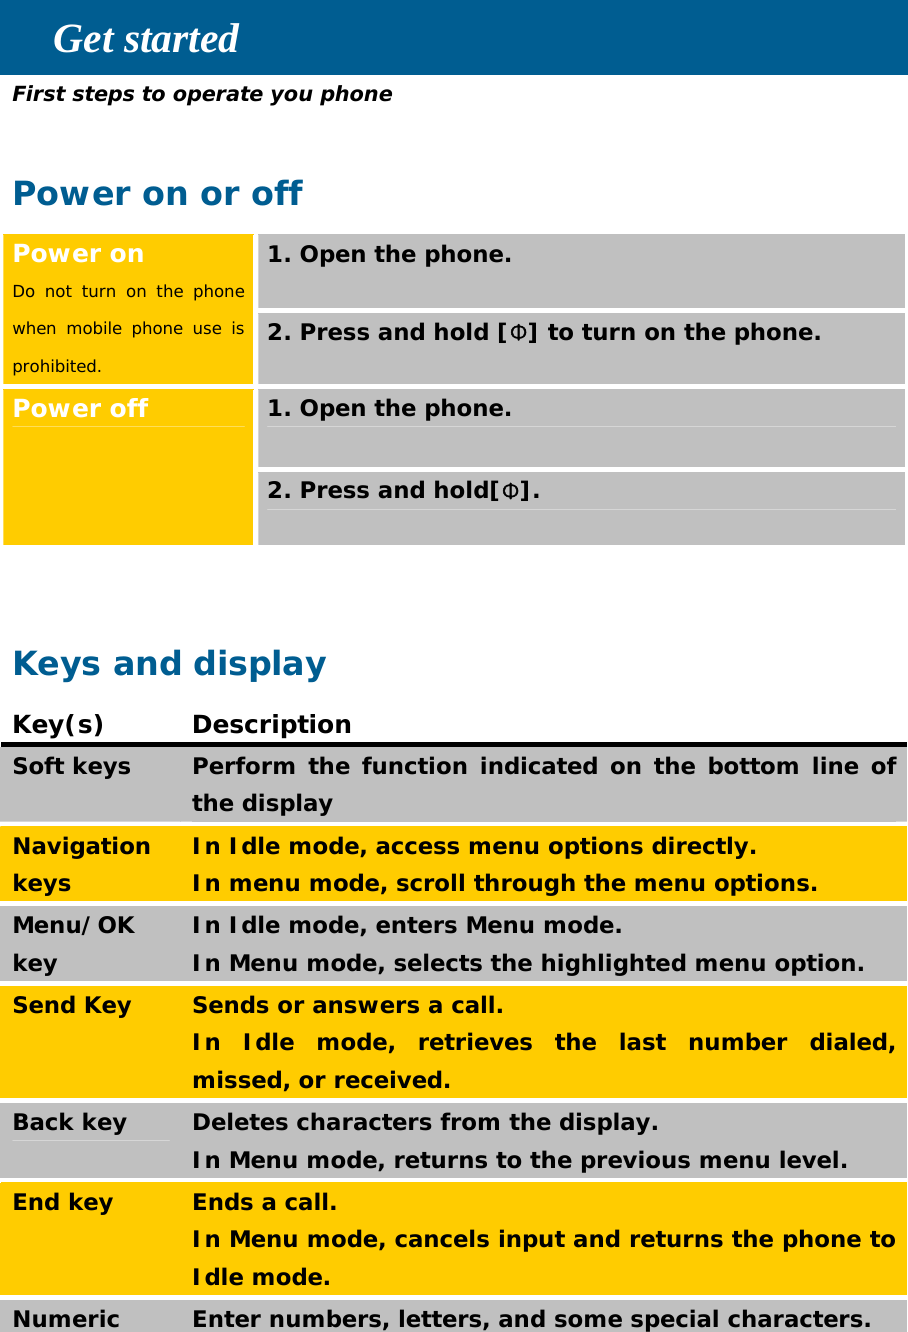 Get started First steps to operate you phone  Power on or off 1. Open the phone. Power on Do not turn on the phone when mobile phone use is prohibited. 2. Press and hold [Φ] to turn on the phone. 1. Open the phone. Power off 2. Press and hold[Φ].   Keys and display Key(s) Description Soft keys  Perform the function indicated on the bottom line of the display Navigation keys In Idle mode, access menu options directly. In menu mode, scroll through the menu options. Menu/OK key In Idle mode, enters Menu mode. In Menu mode, selects the highlighted menu option. Send Key  Sends or answers a call. In Idle mode, retrieves the last number dialed, missed, or received. Back key  Deletes characters from the display.  In Menu mode, returns to the previous menu level. End key  Ends a call.  In Menu mode, cancels input and returns the phone to Idle mode. Numeric  Enter numbers, letters, and some special characters. 